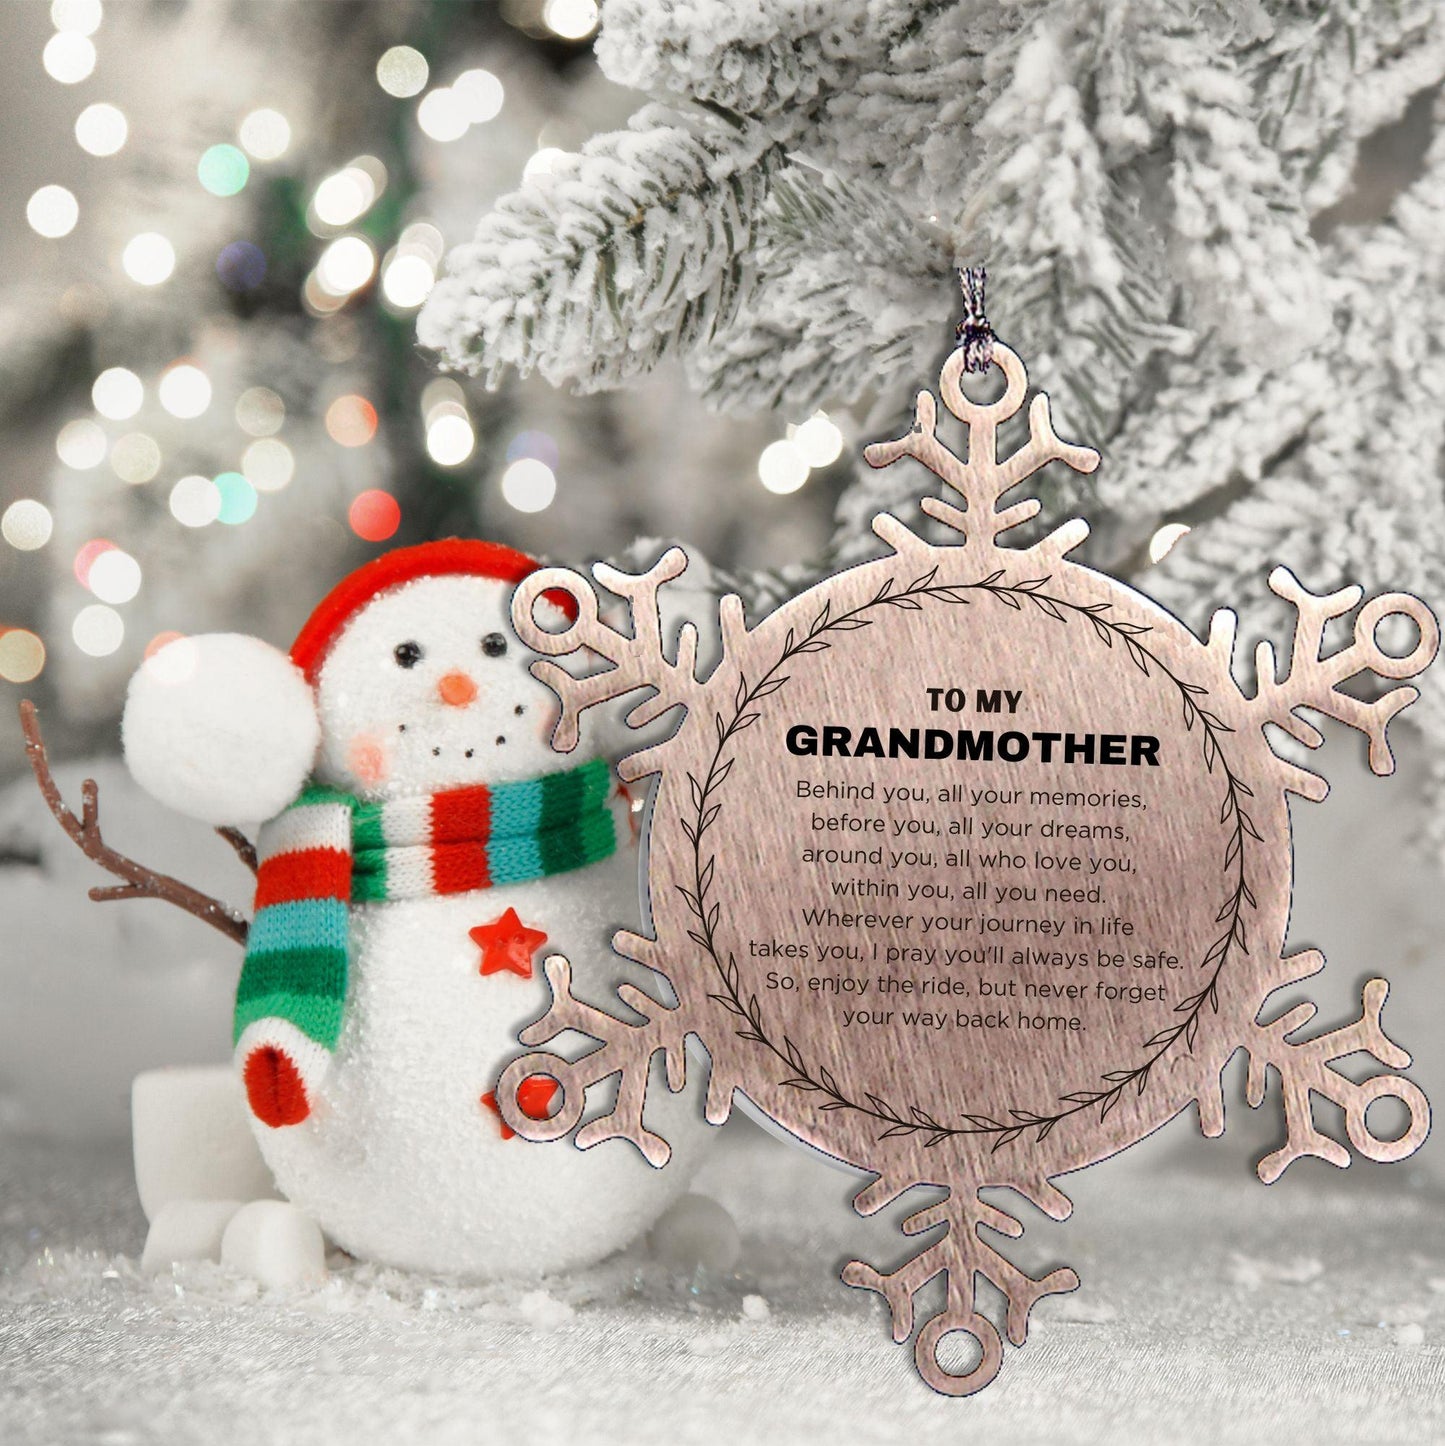 Inspirational Grandmother Snowflake Ornament - Behind you, all your Memories, Before you, all your Dreams - Birthday, Christmas Holiday Gifts - Mallard Moon Gift Shop